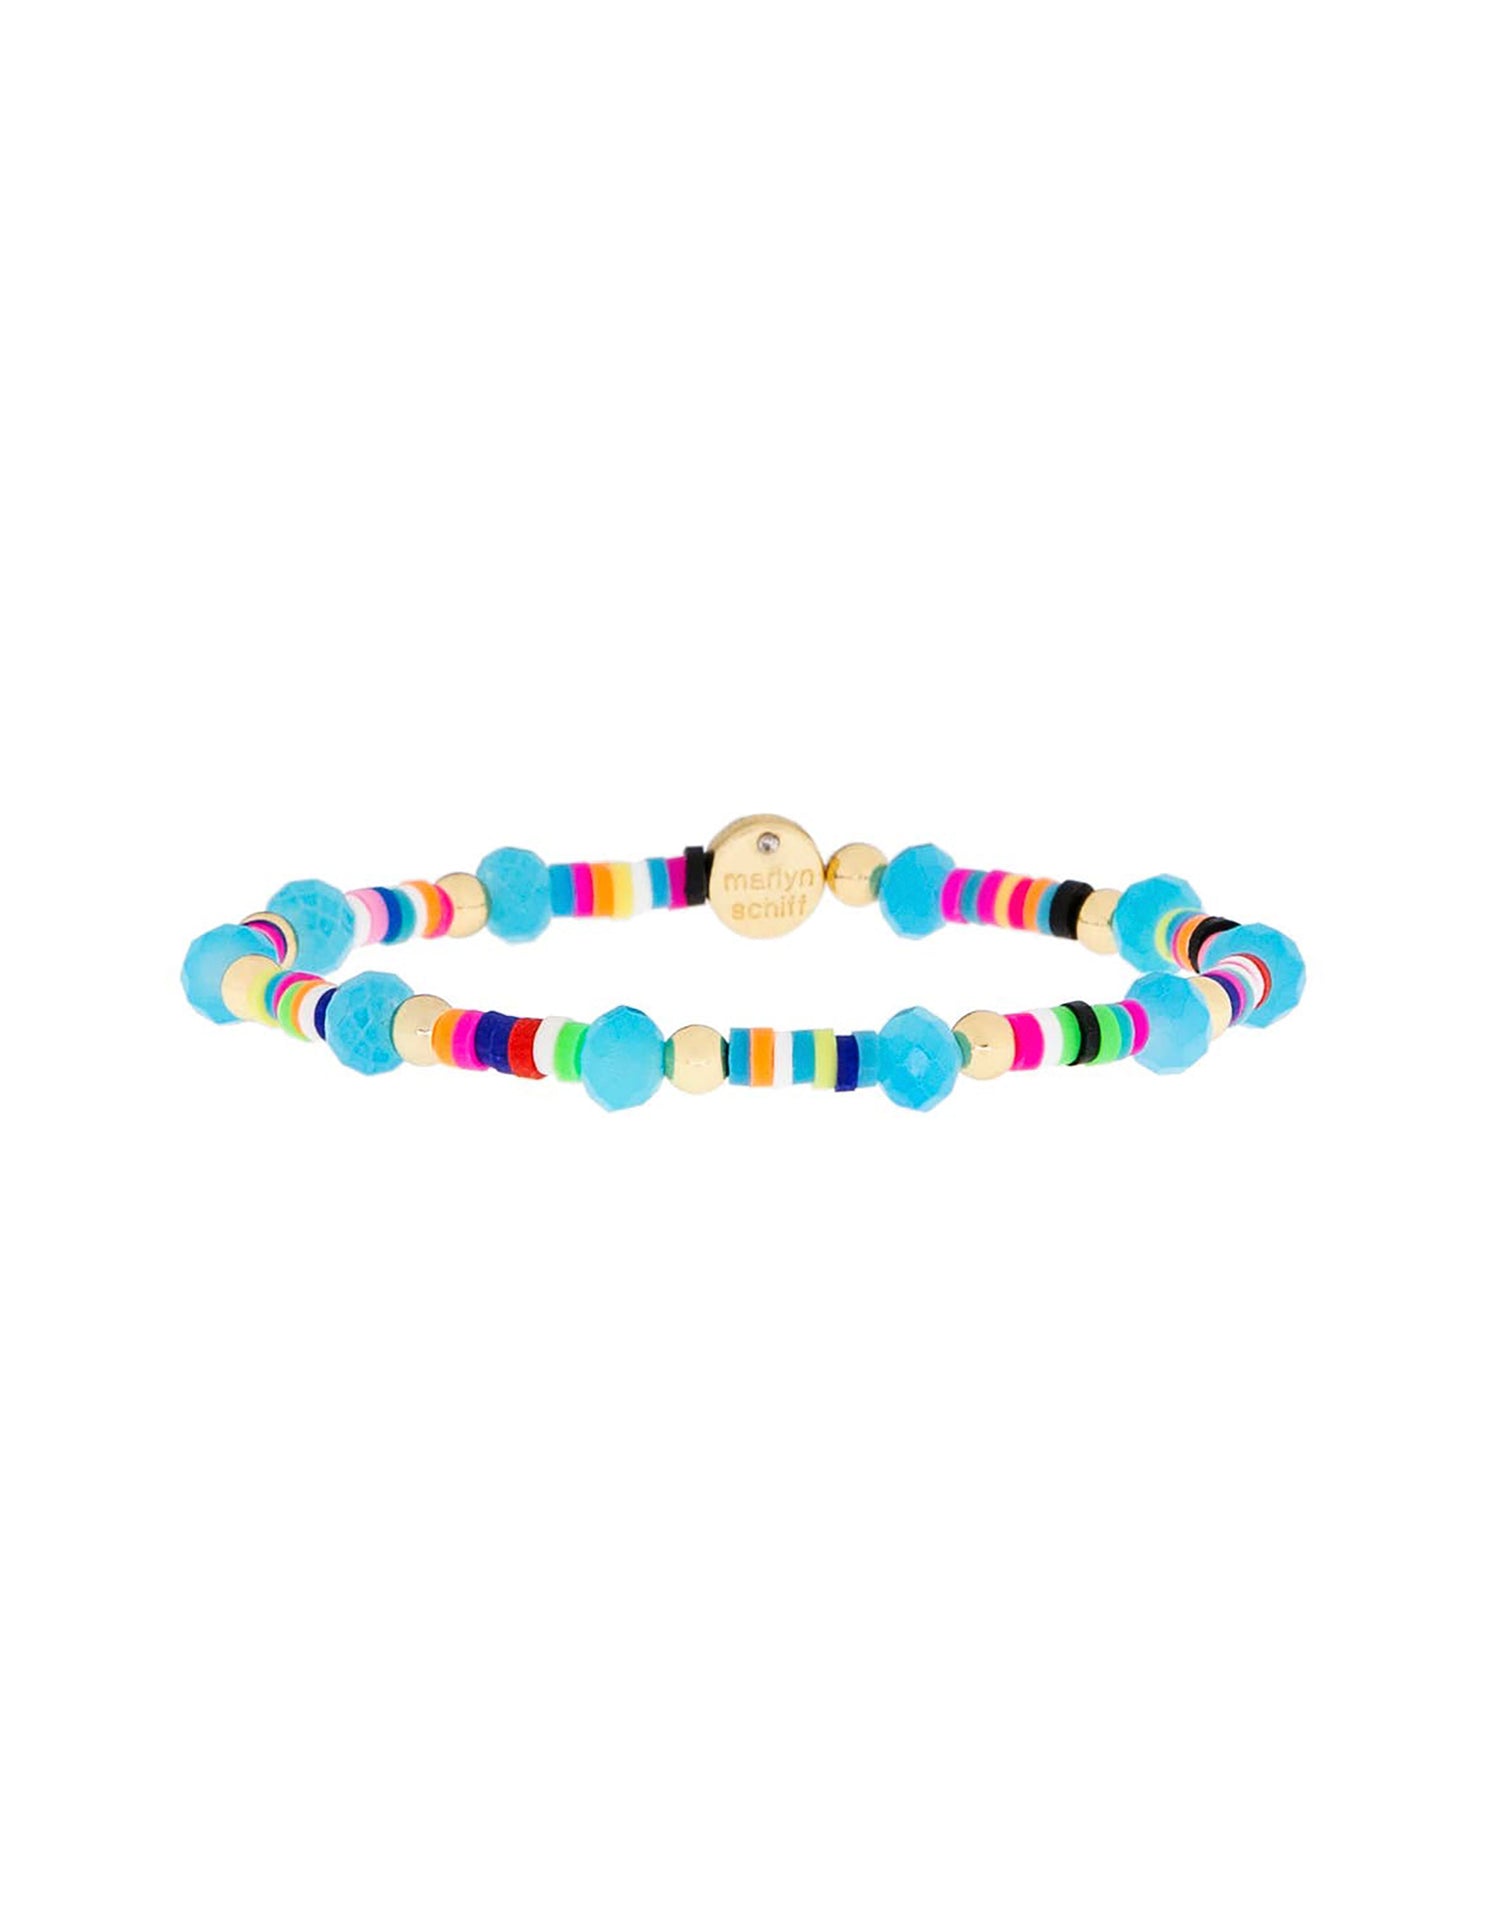 Heishi Crystal Bead Stretch Bracelet by Marlyn Schiff in Gold/Turquoise - Product View